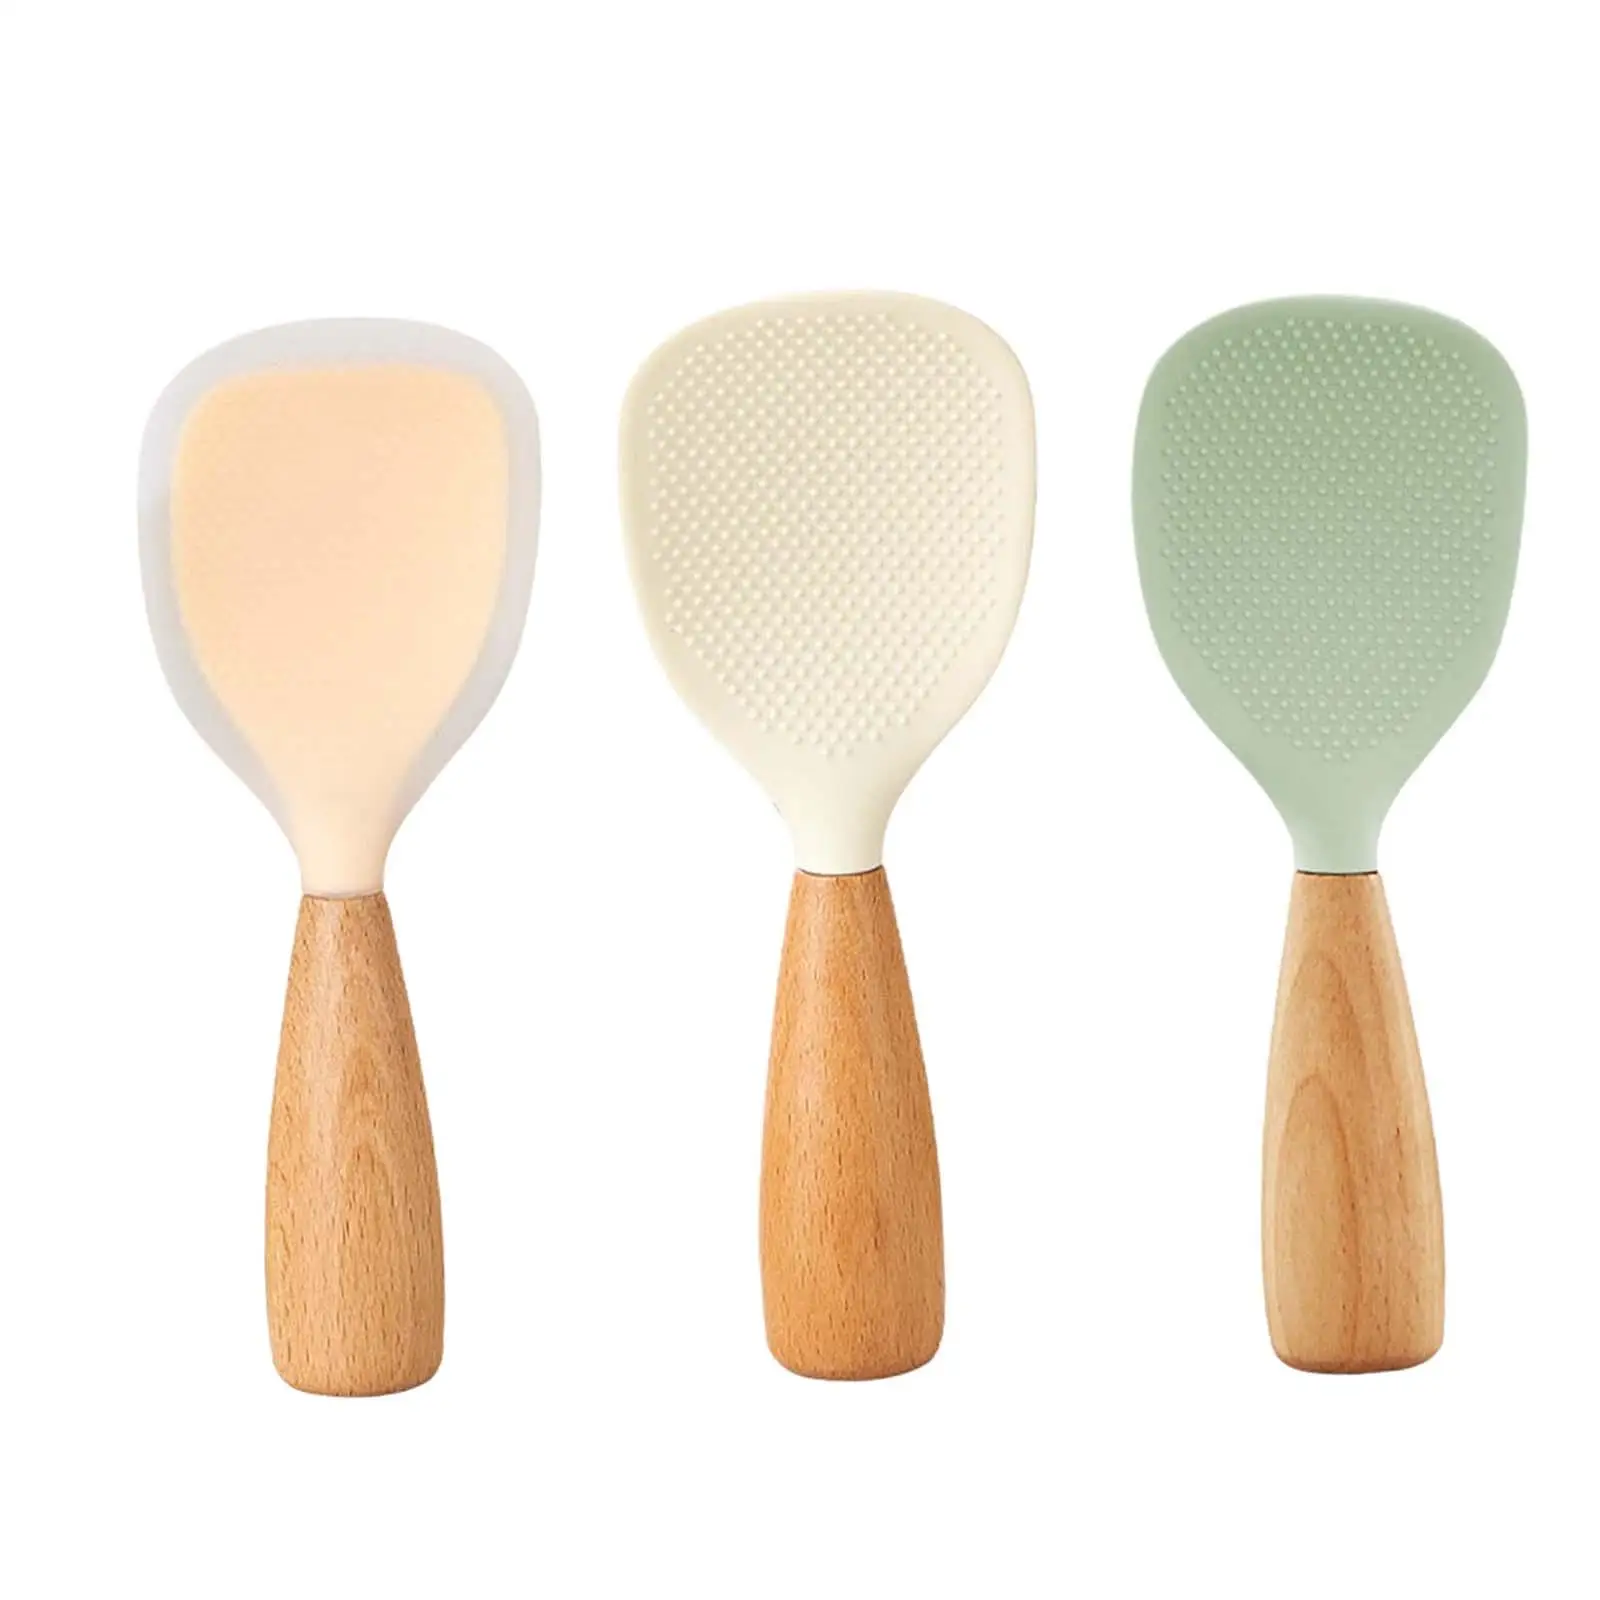 Nonstick Rice Spatula Smooth Comfortable to Hold Multifunctional Food Service Scoop for Mashed Potato Restaurant Kitchen Gadgets